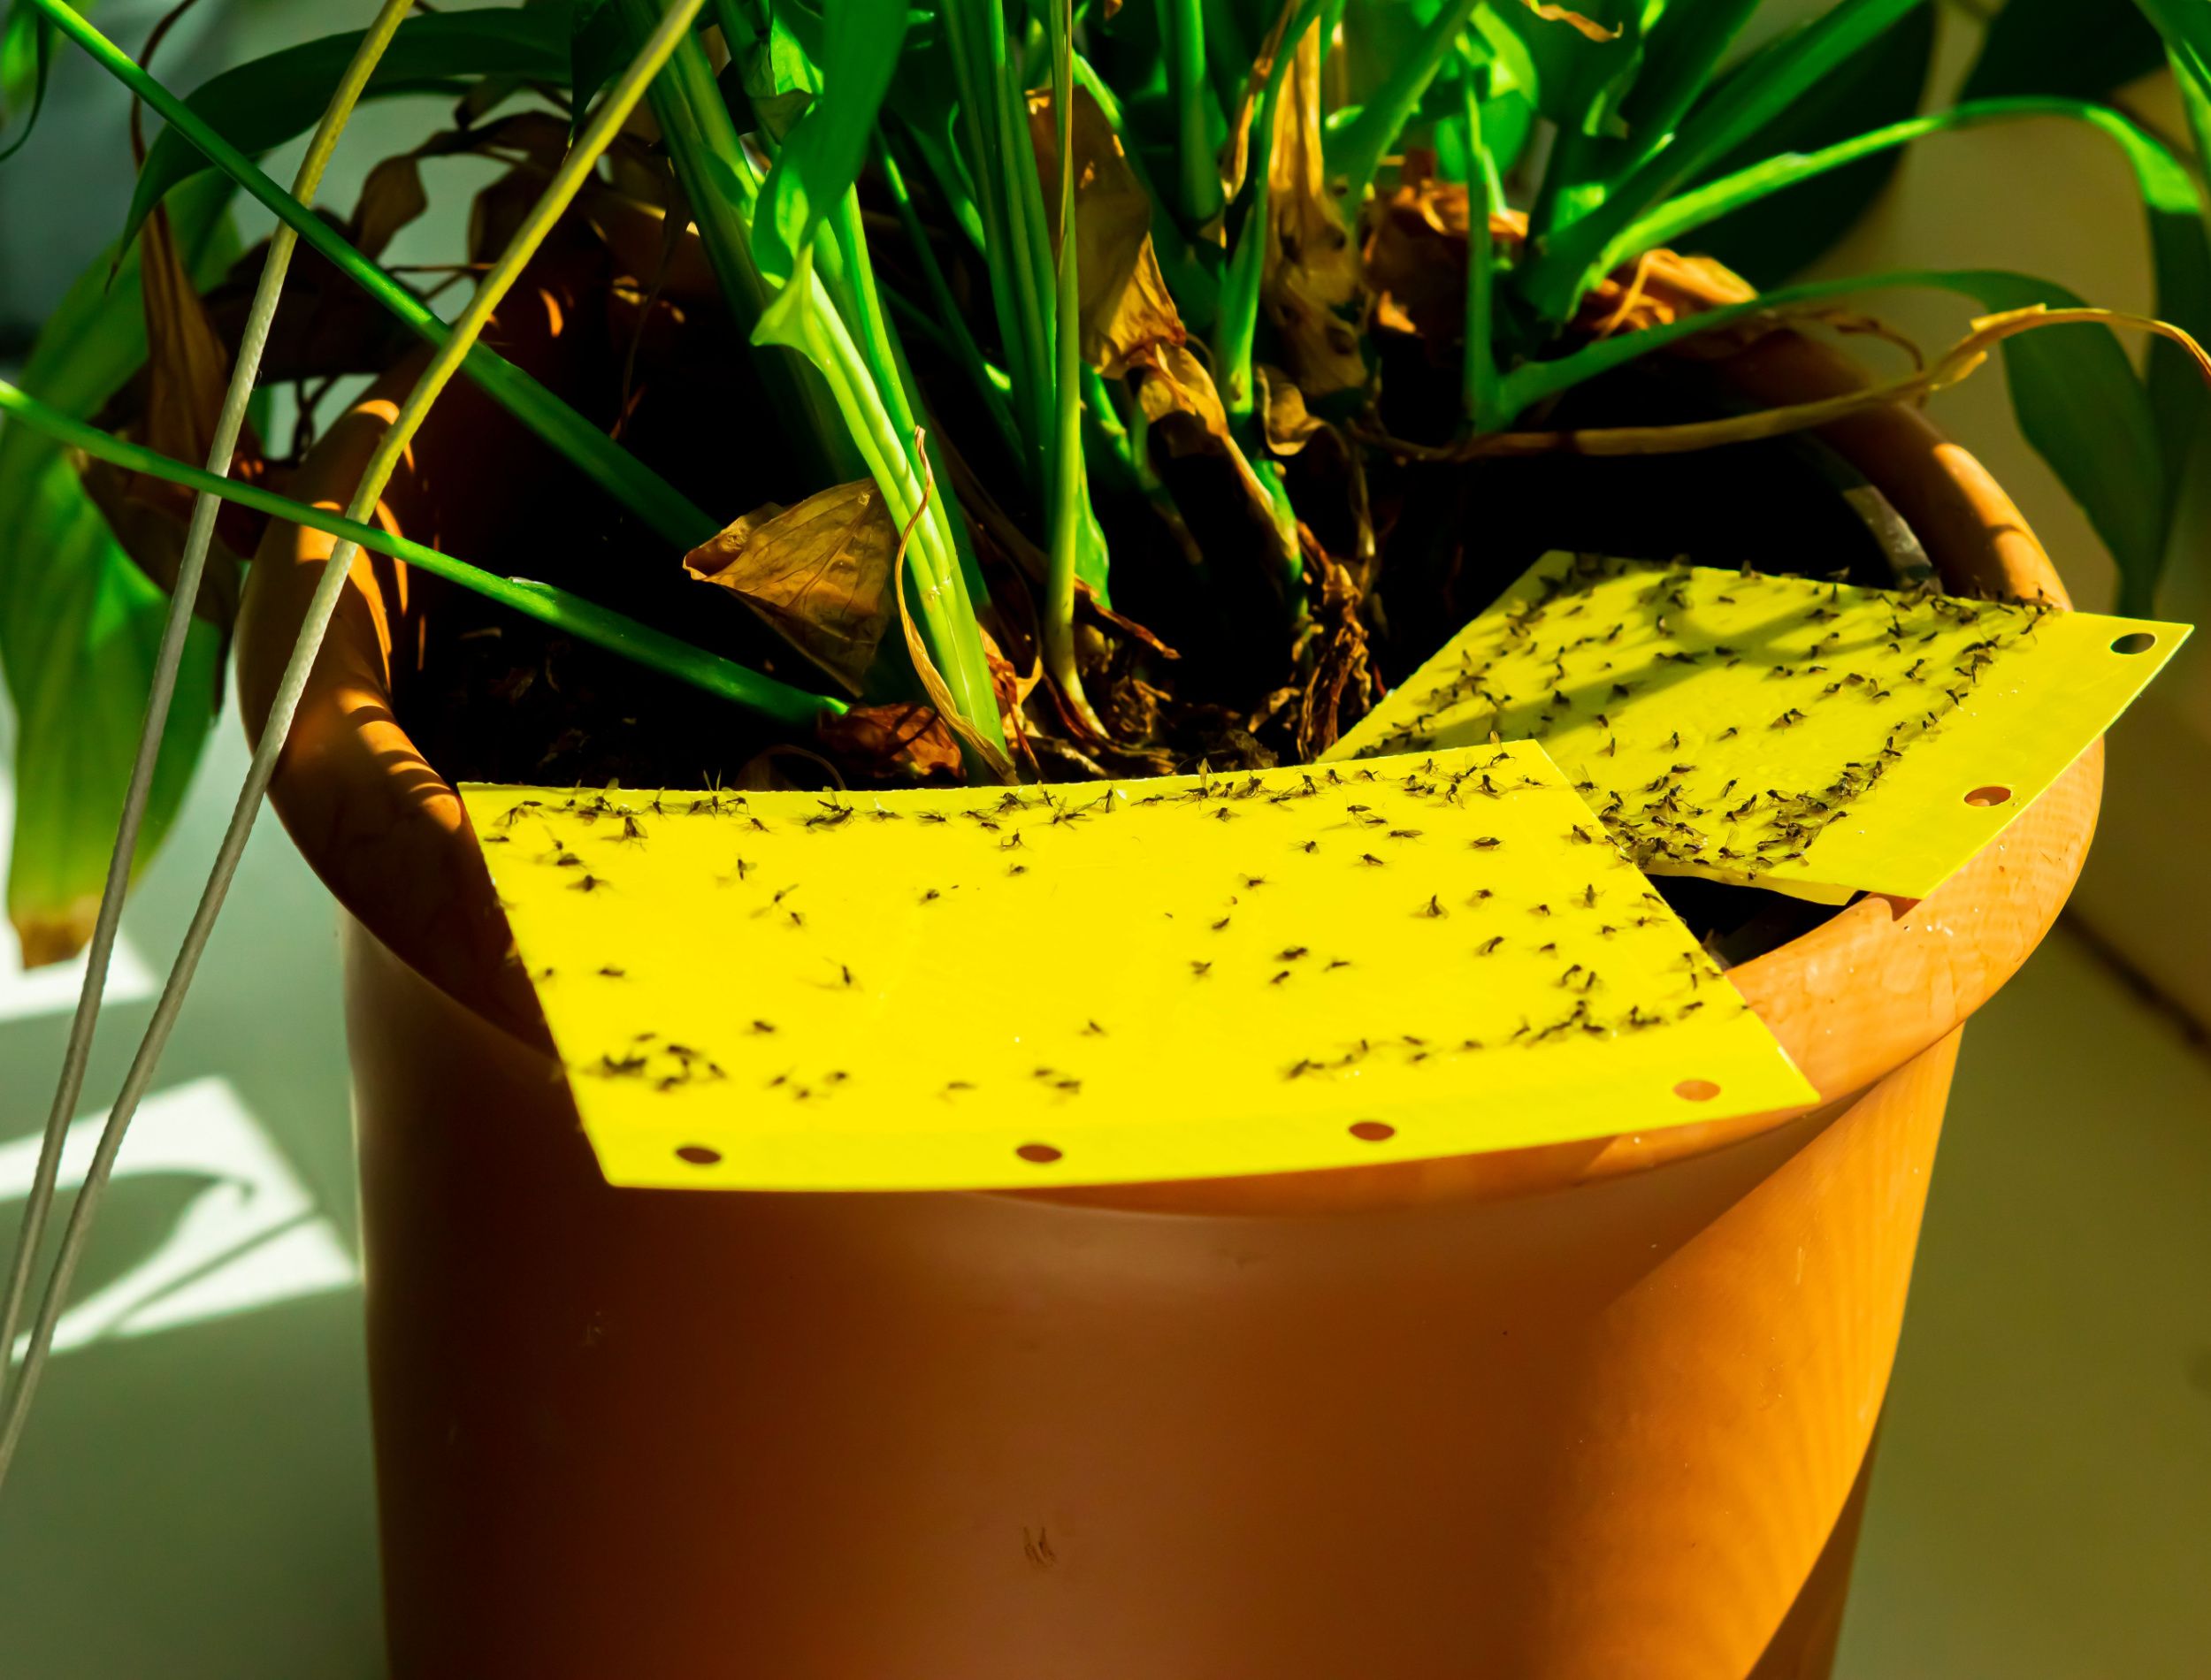 Fungus gnats on a sticky trap for houseplants